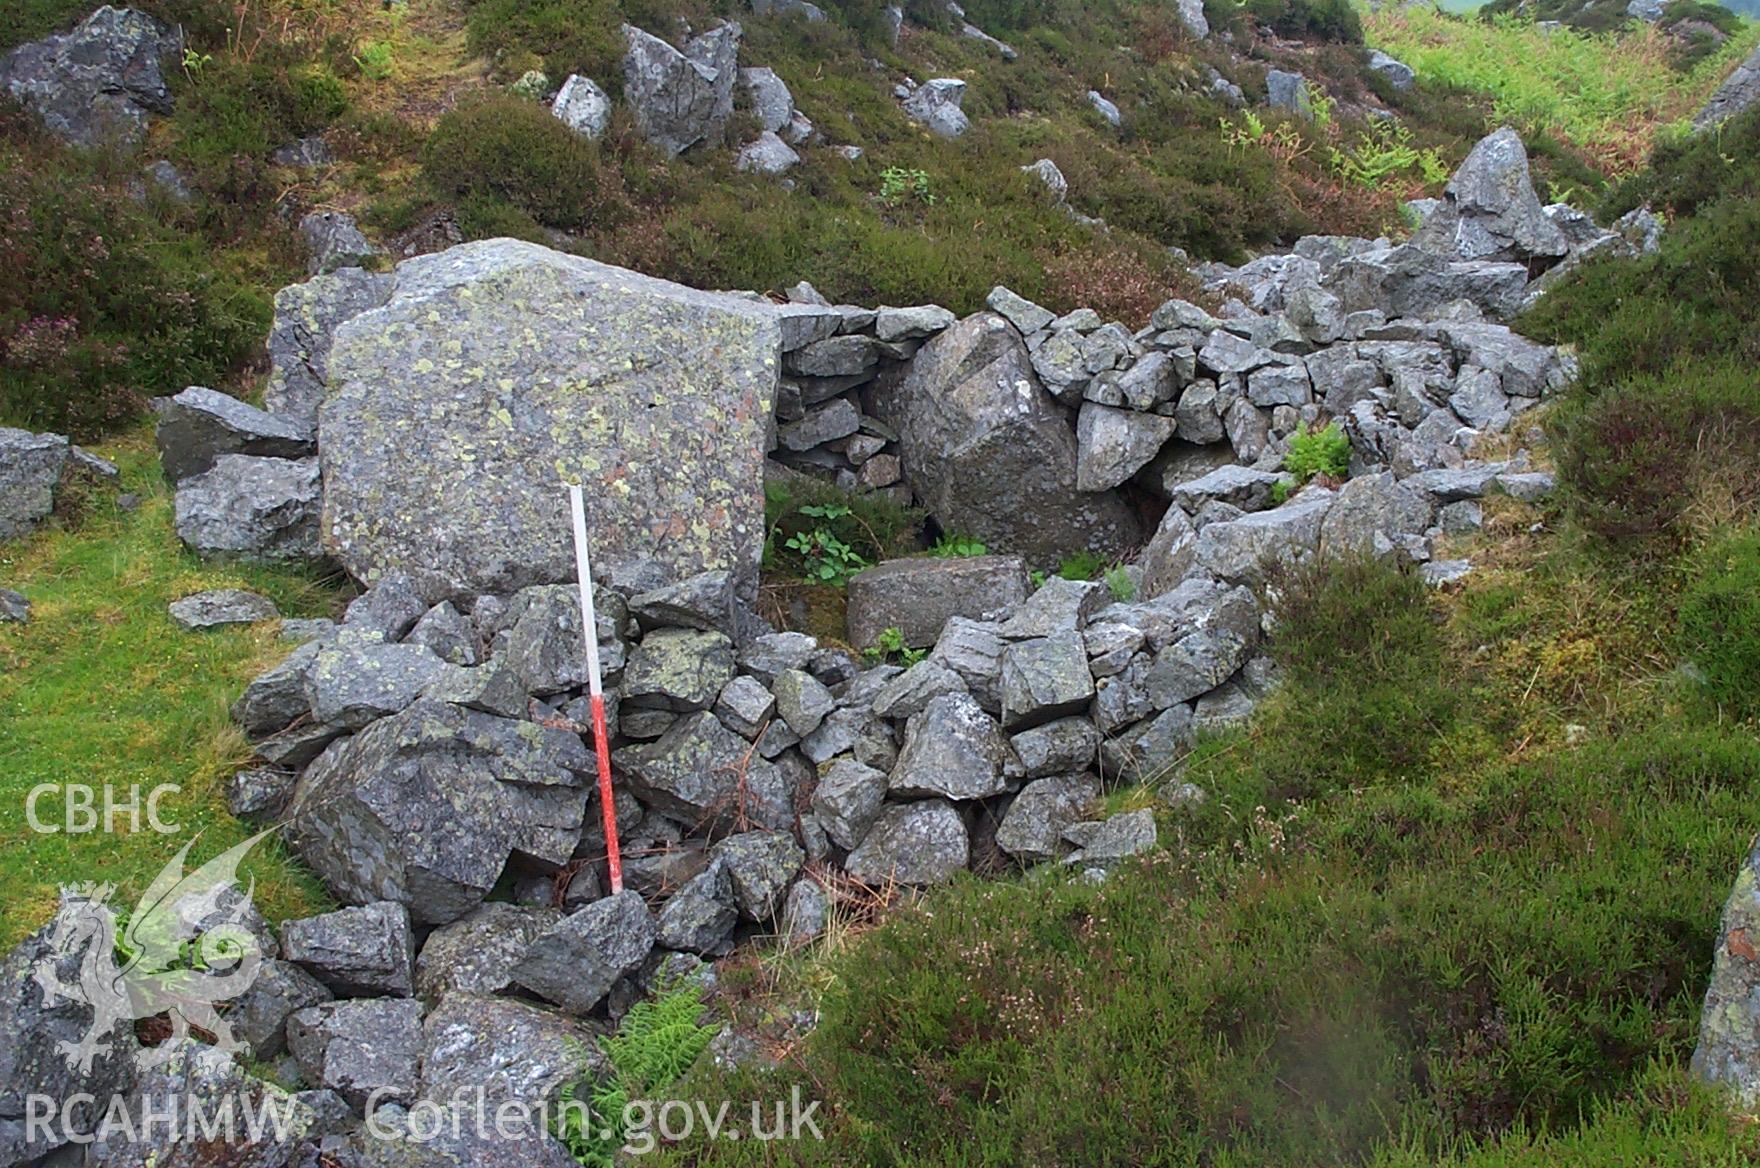 Digital photograph of Moel Sych Cairn taken on 28/04/2004 by Oxford Archaeology North during the Dyffryn Tanat Upland Survey